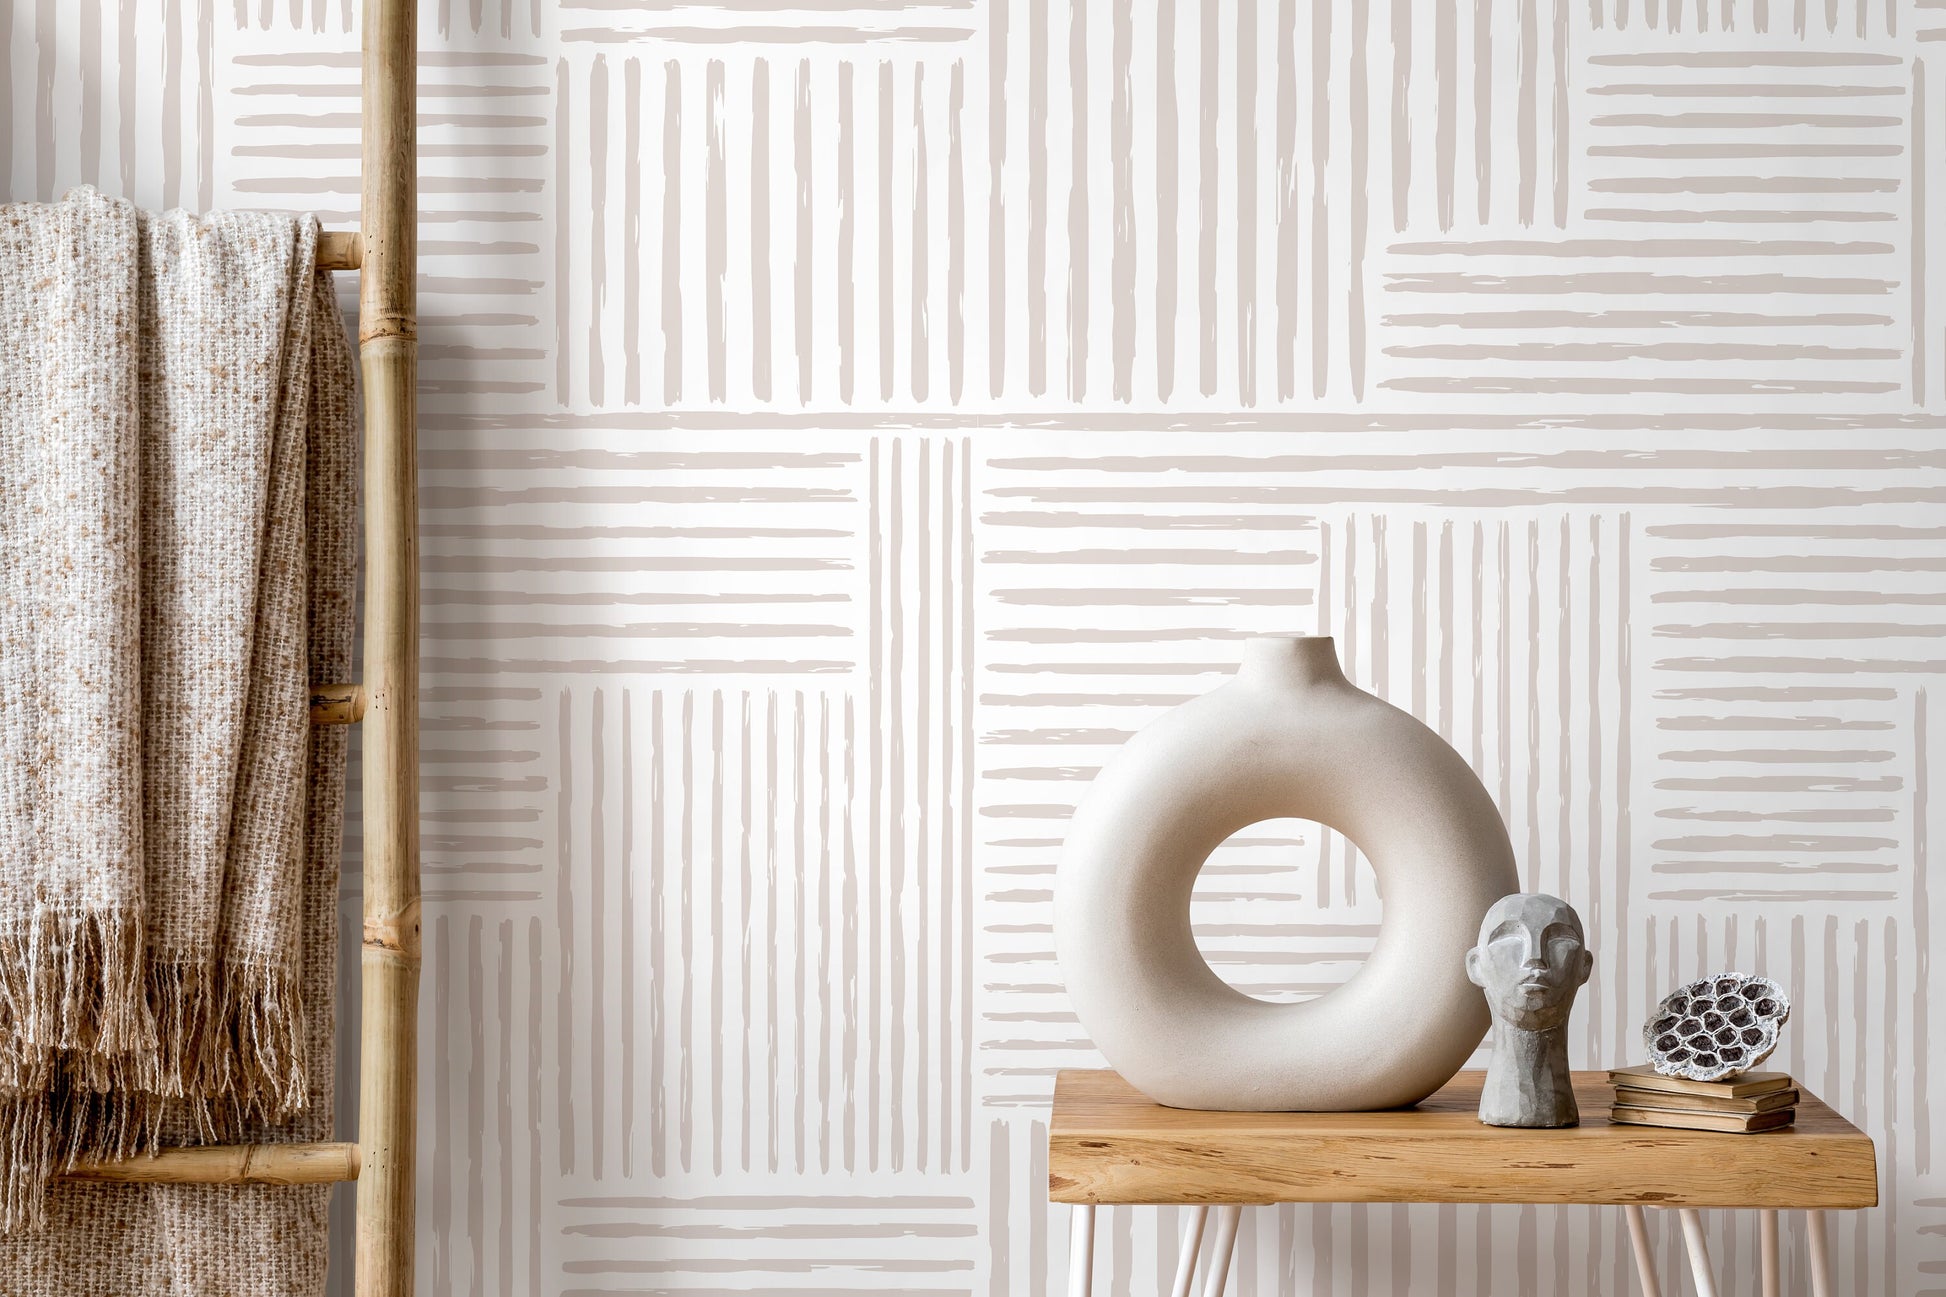 Warm Neutral Paint Brushed Labyrinth Wallpaper Peel and Stick Removable Repositionable Minimalistic Abstract Boho Beige & White - ZABJ